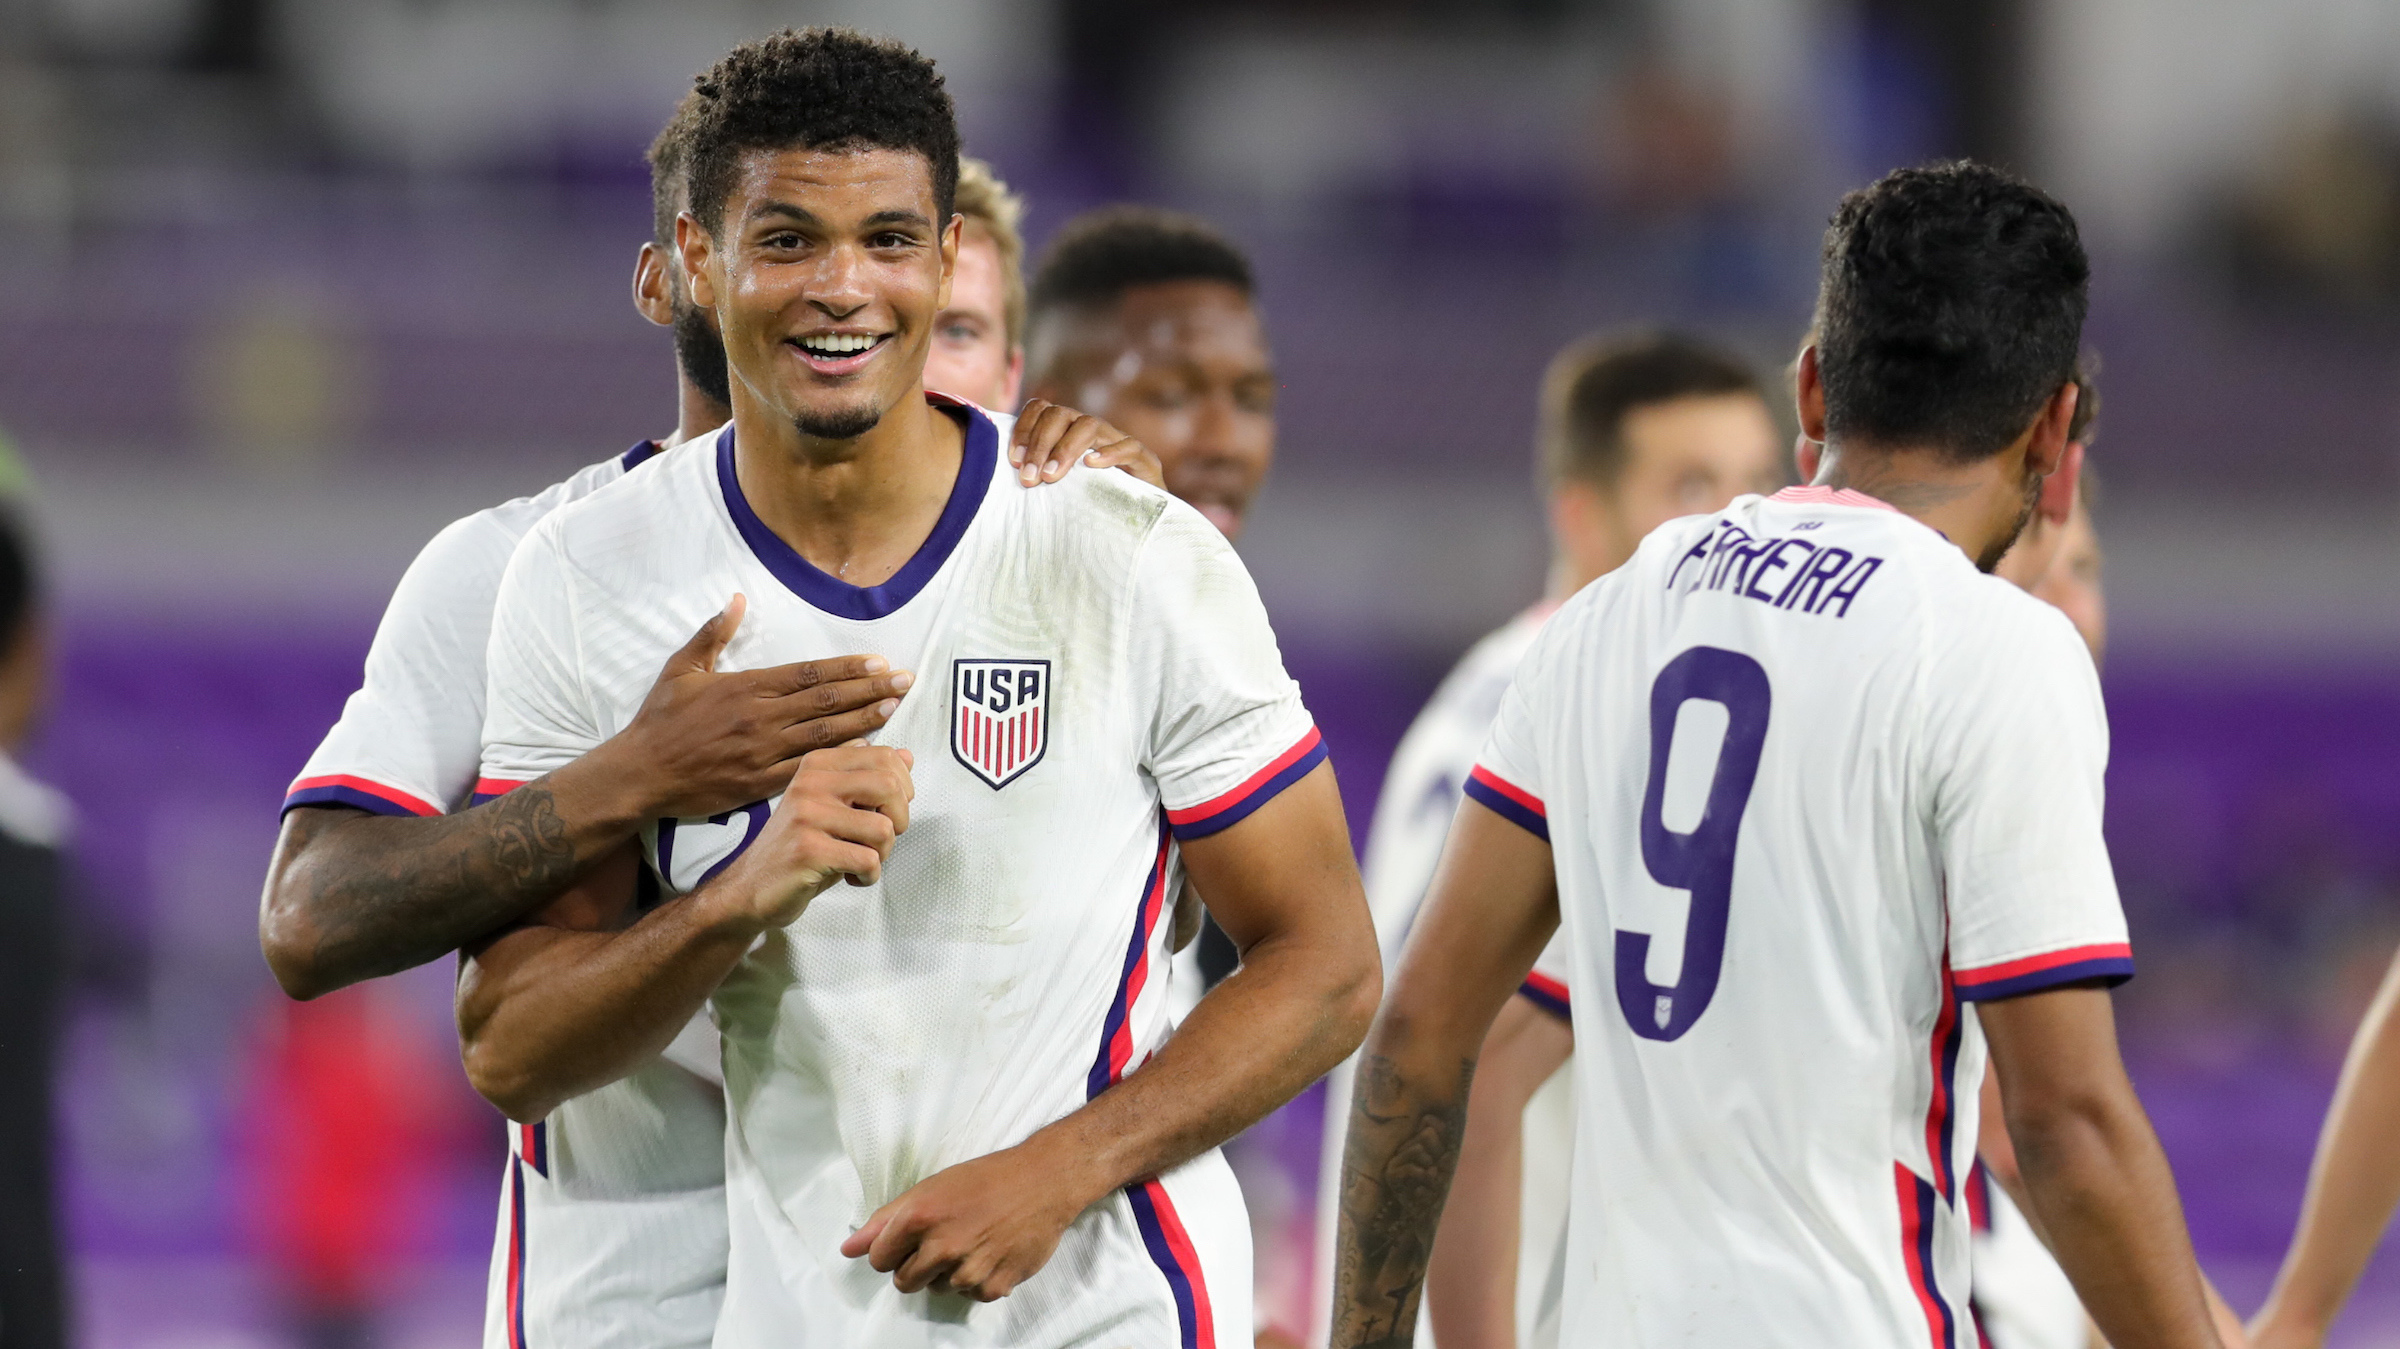 USMNT kicks off 2021 with dominant 7-0 win over Trinidad and Tobago